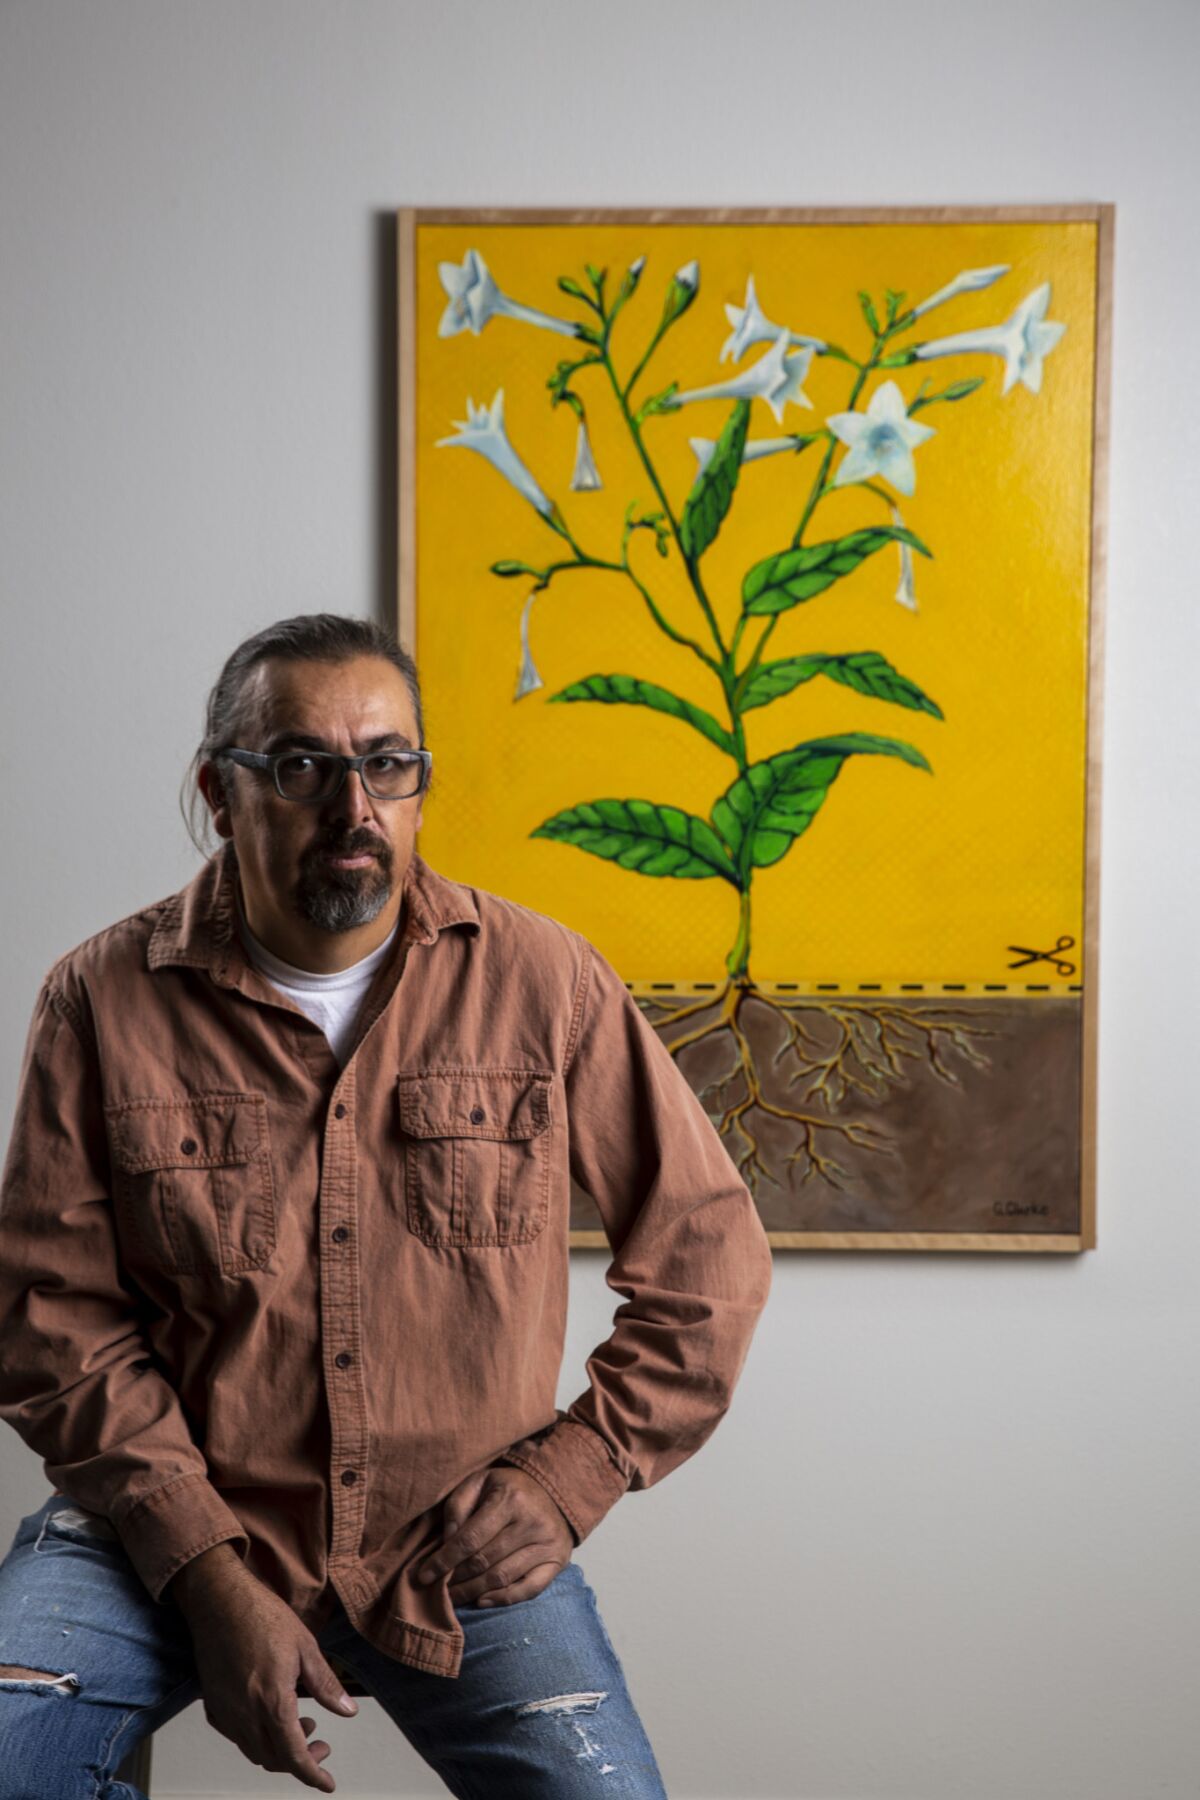 Cahuilla artist Gerald Clarke Jr. poses for a portrait with his artwork titled "Disenrollment," at his home on the Cahuilla Indian reservation on Monday, Nov. 26, 2018 in Anza, Calif.